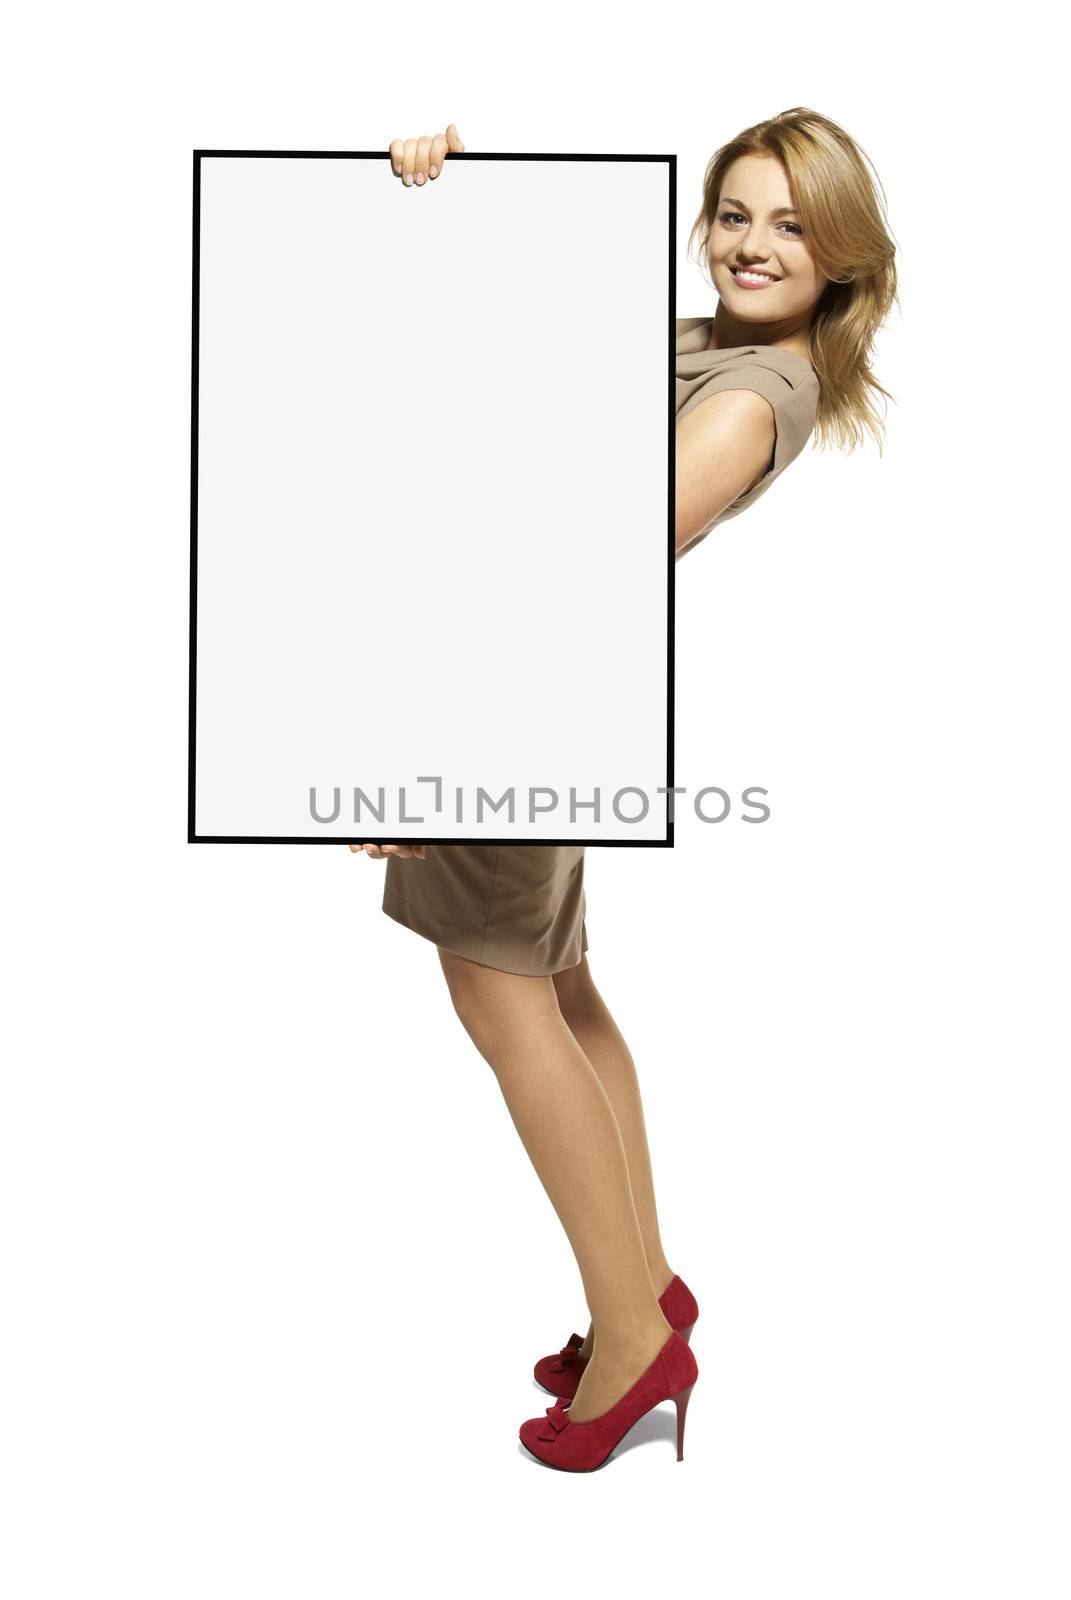 Attractive Young Woman Holding Up a Blank Sign. Studio shot of woman isolated on white background.